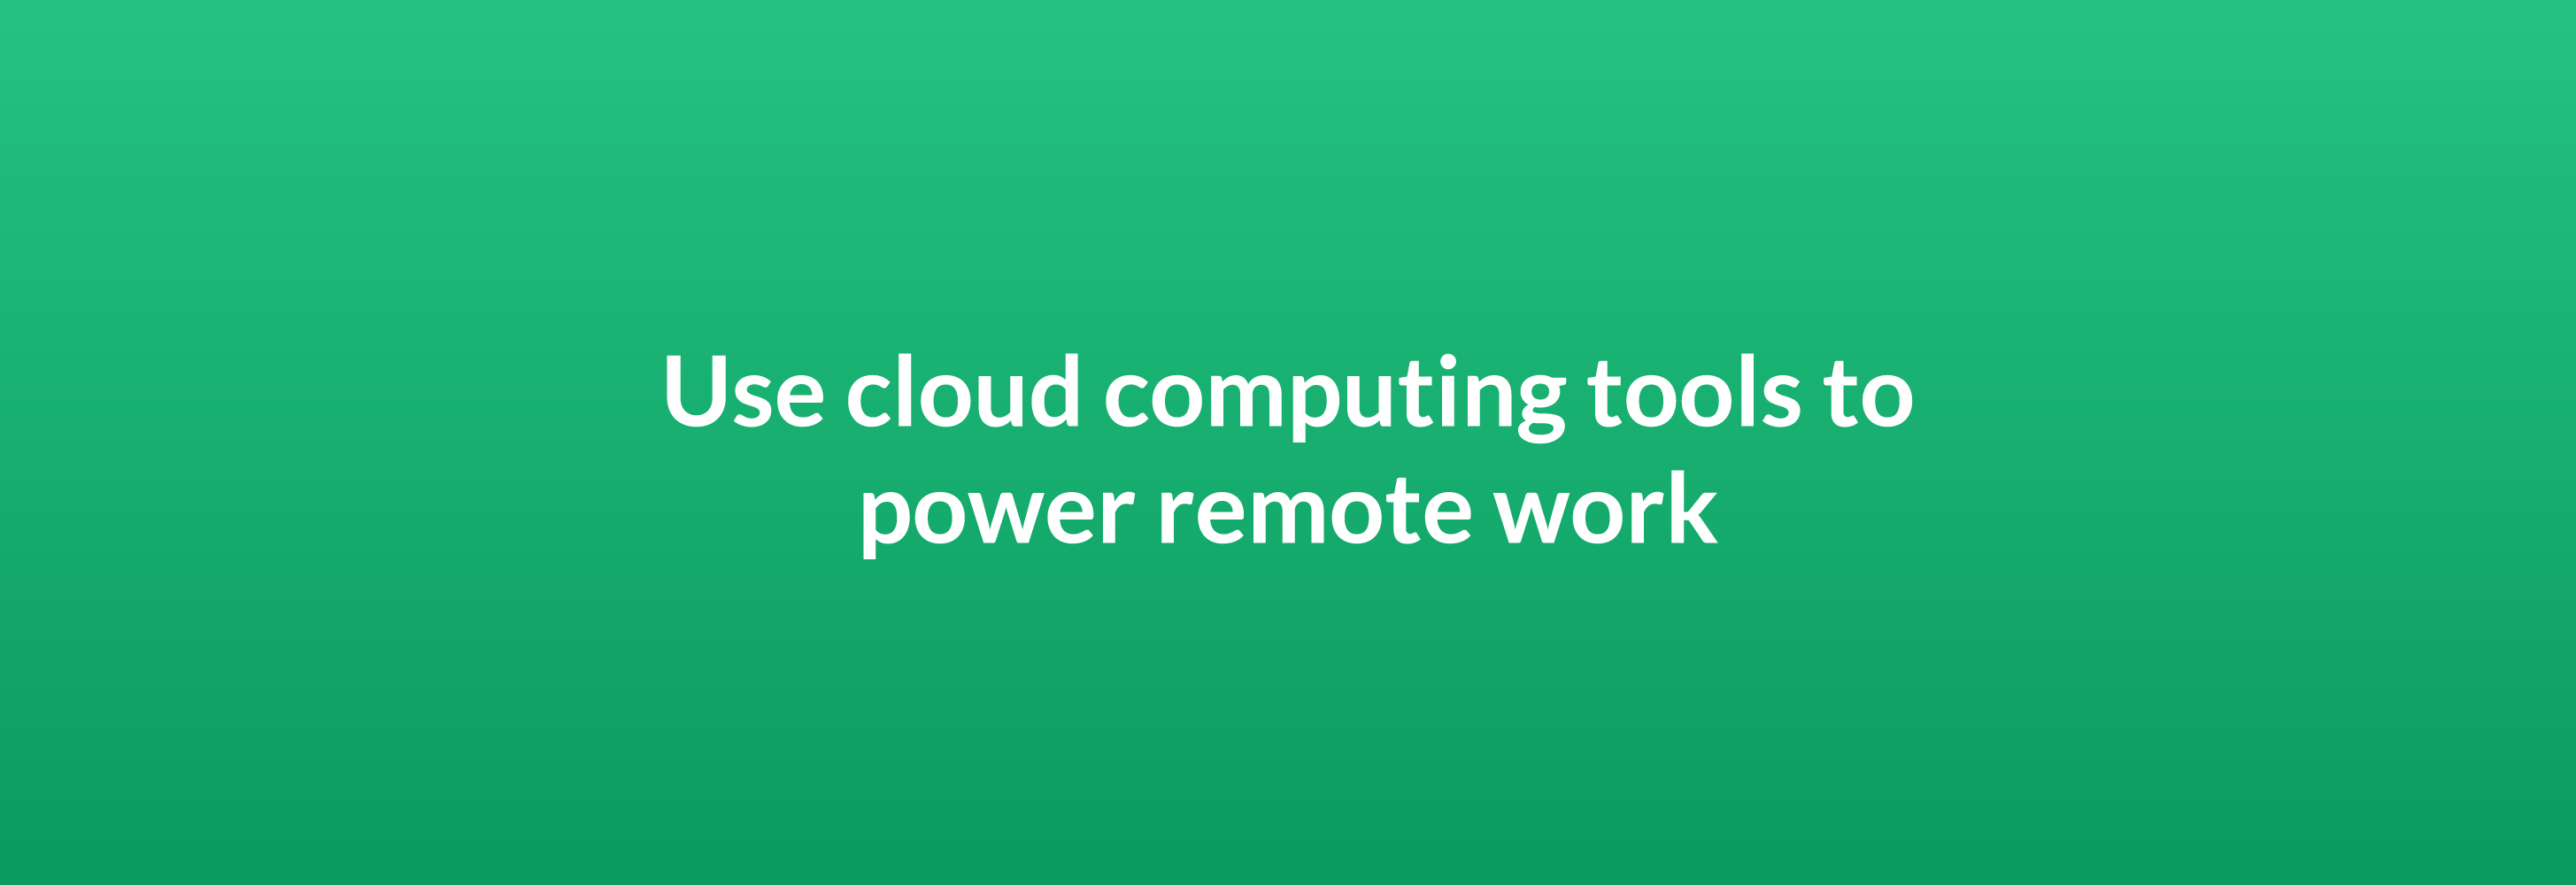 Use cloud computing tools to power remote work